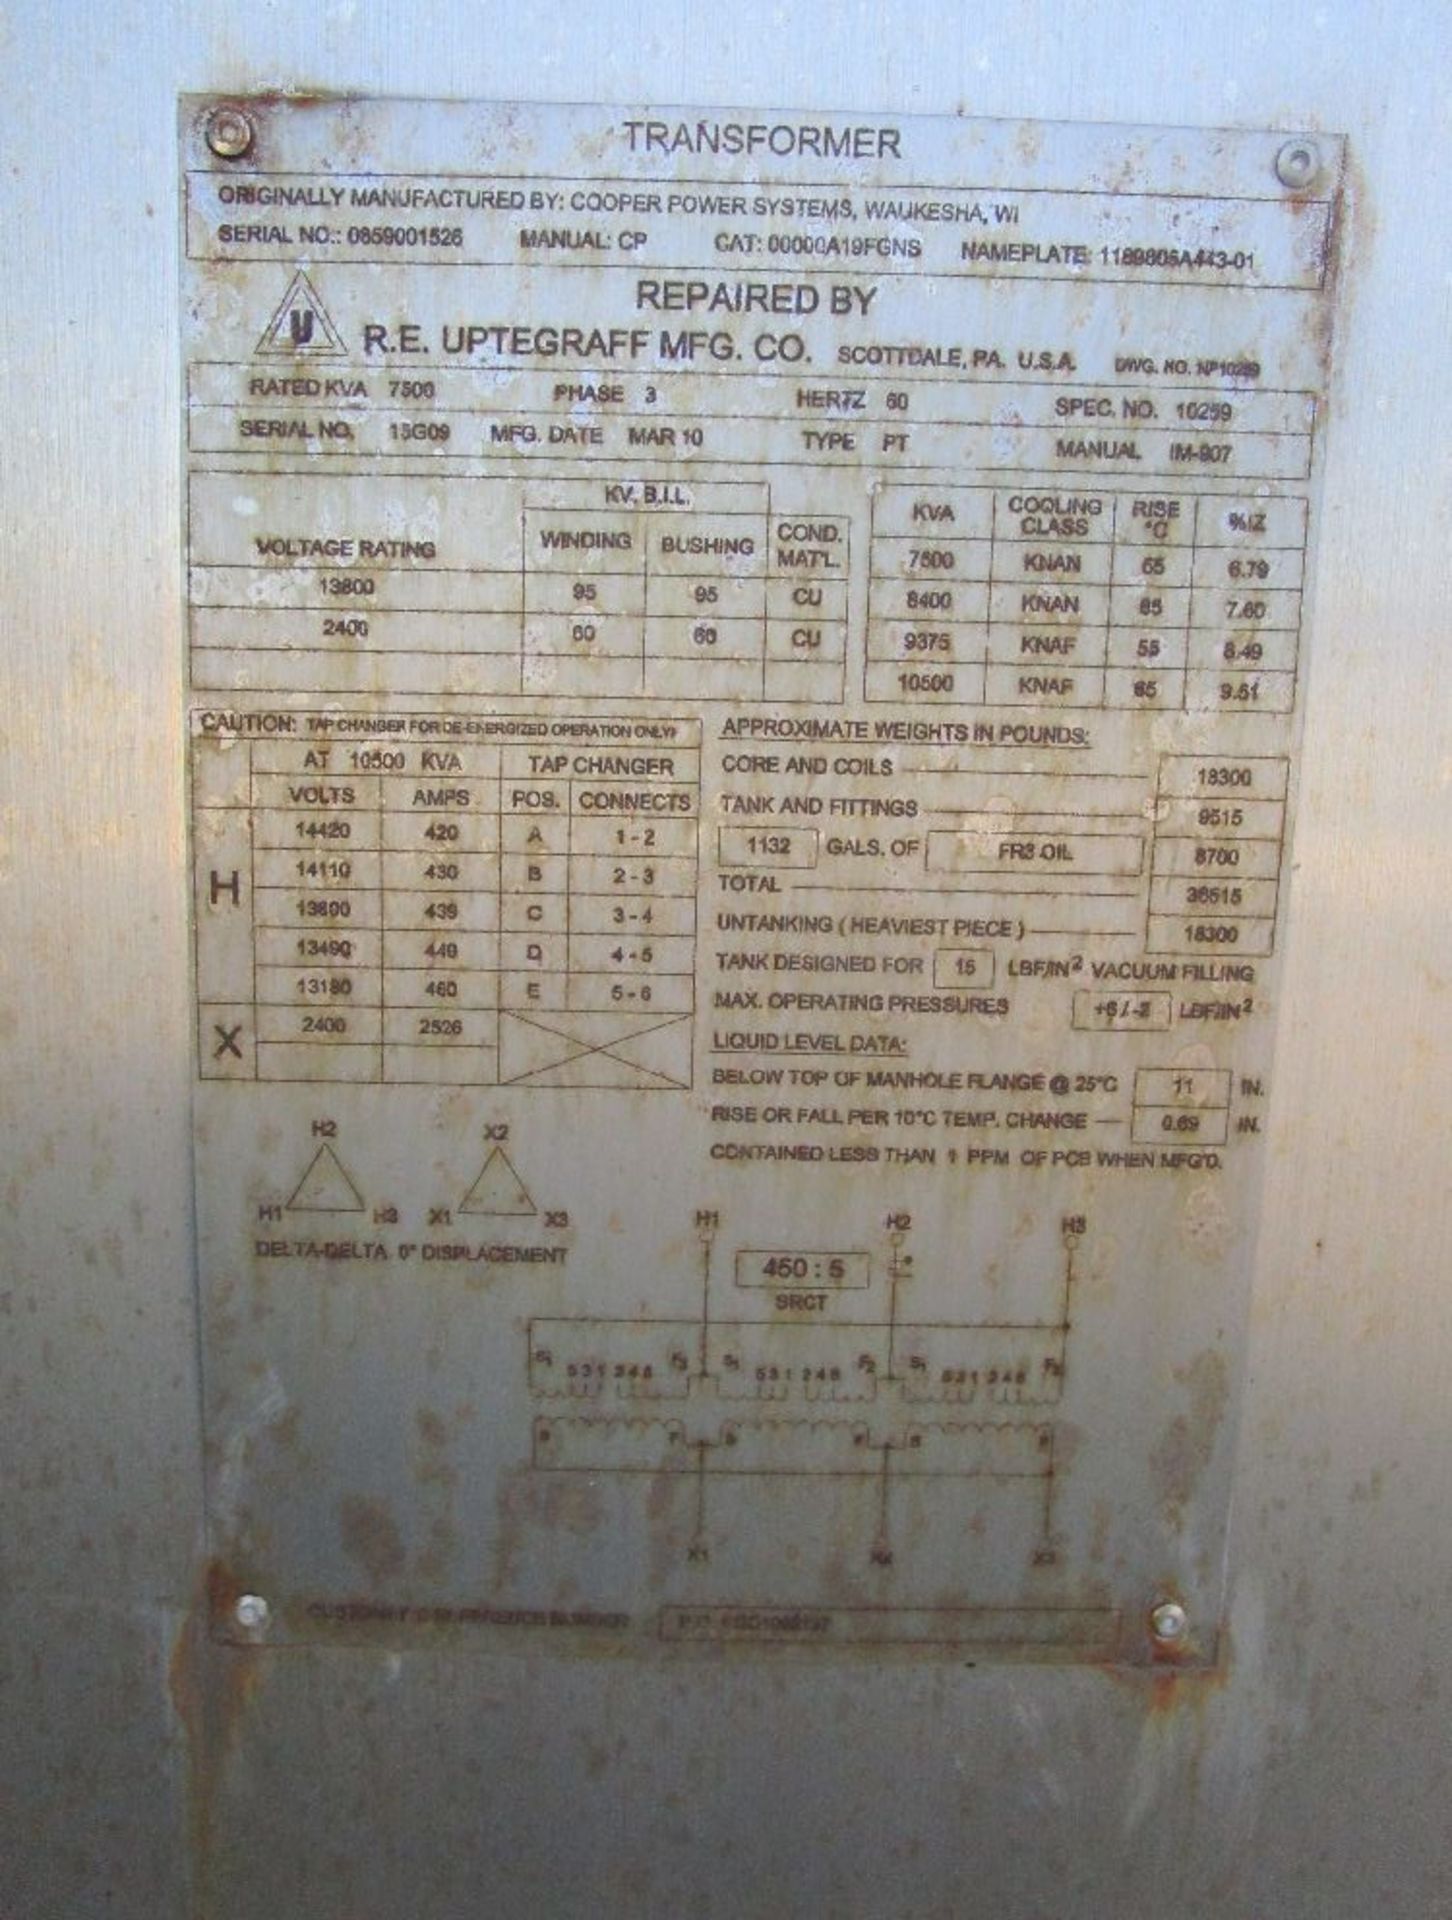 Cooper Power Systems Model A19FGNS 7500 KVA Transformer - Image 5 of 5